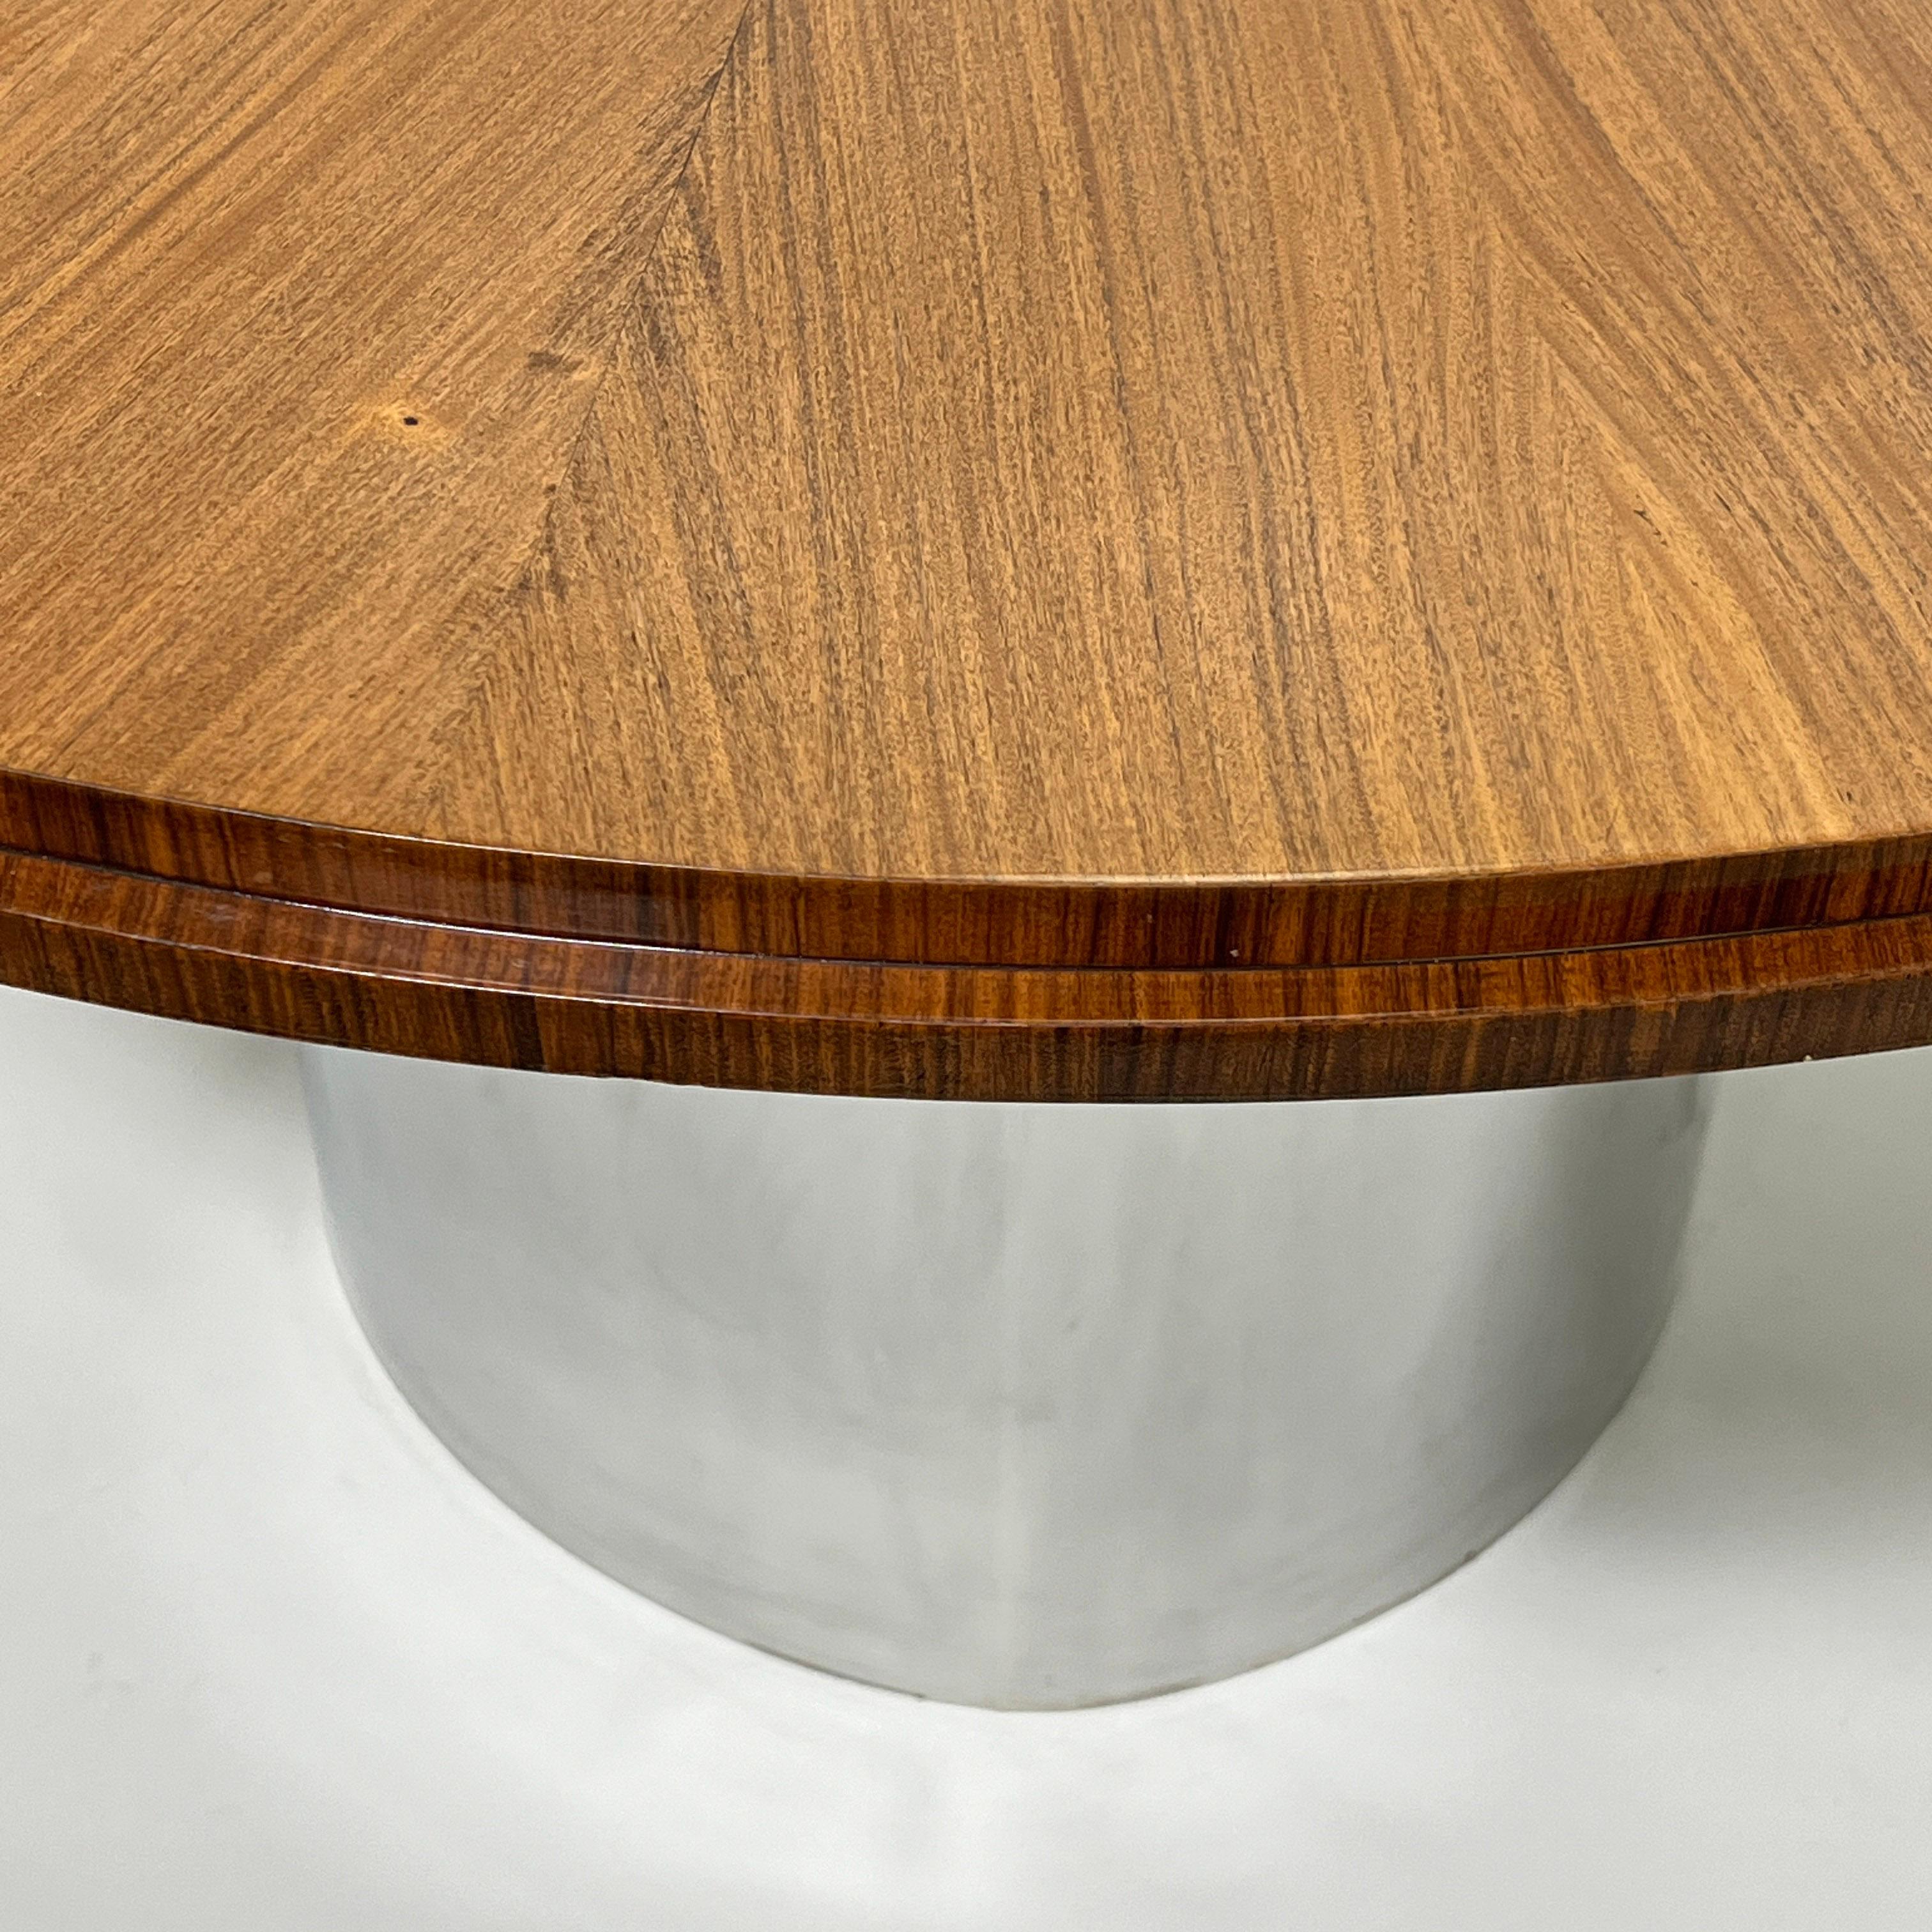 A 1970s custom made expanding dining table in the manner of Karl Springer. The top, veneered in mahogany with a wenge edge, rests upon a custom chromed steel pedestal. It is expandable from 50” without leaves to 74” with five book-matched elbow